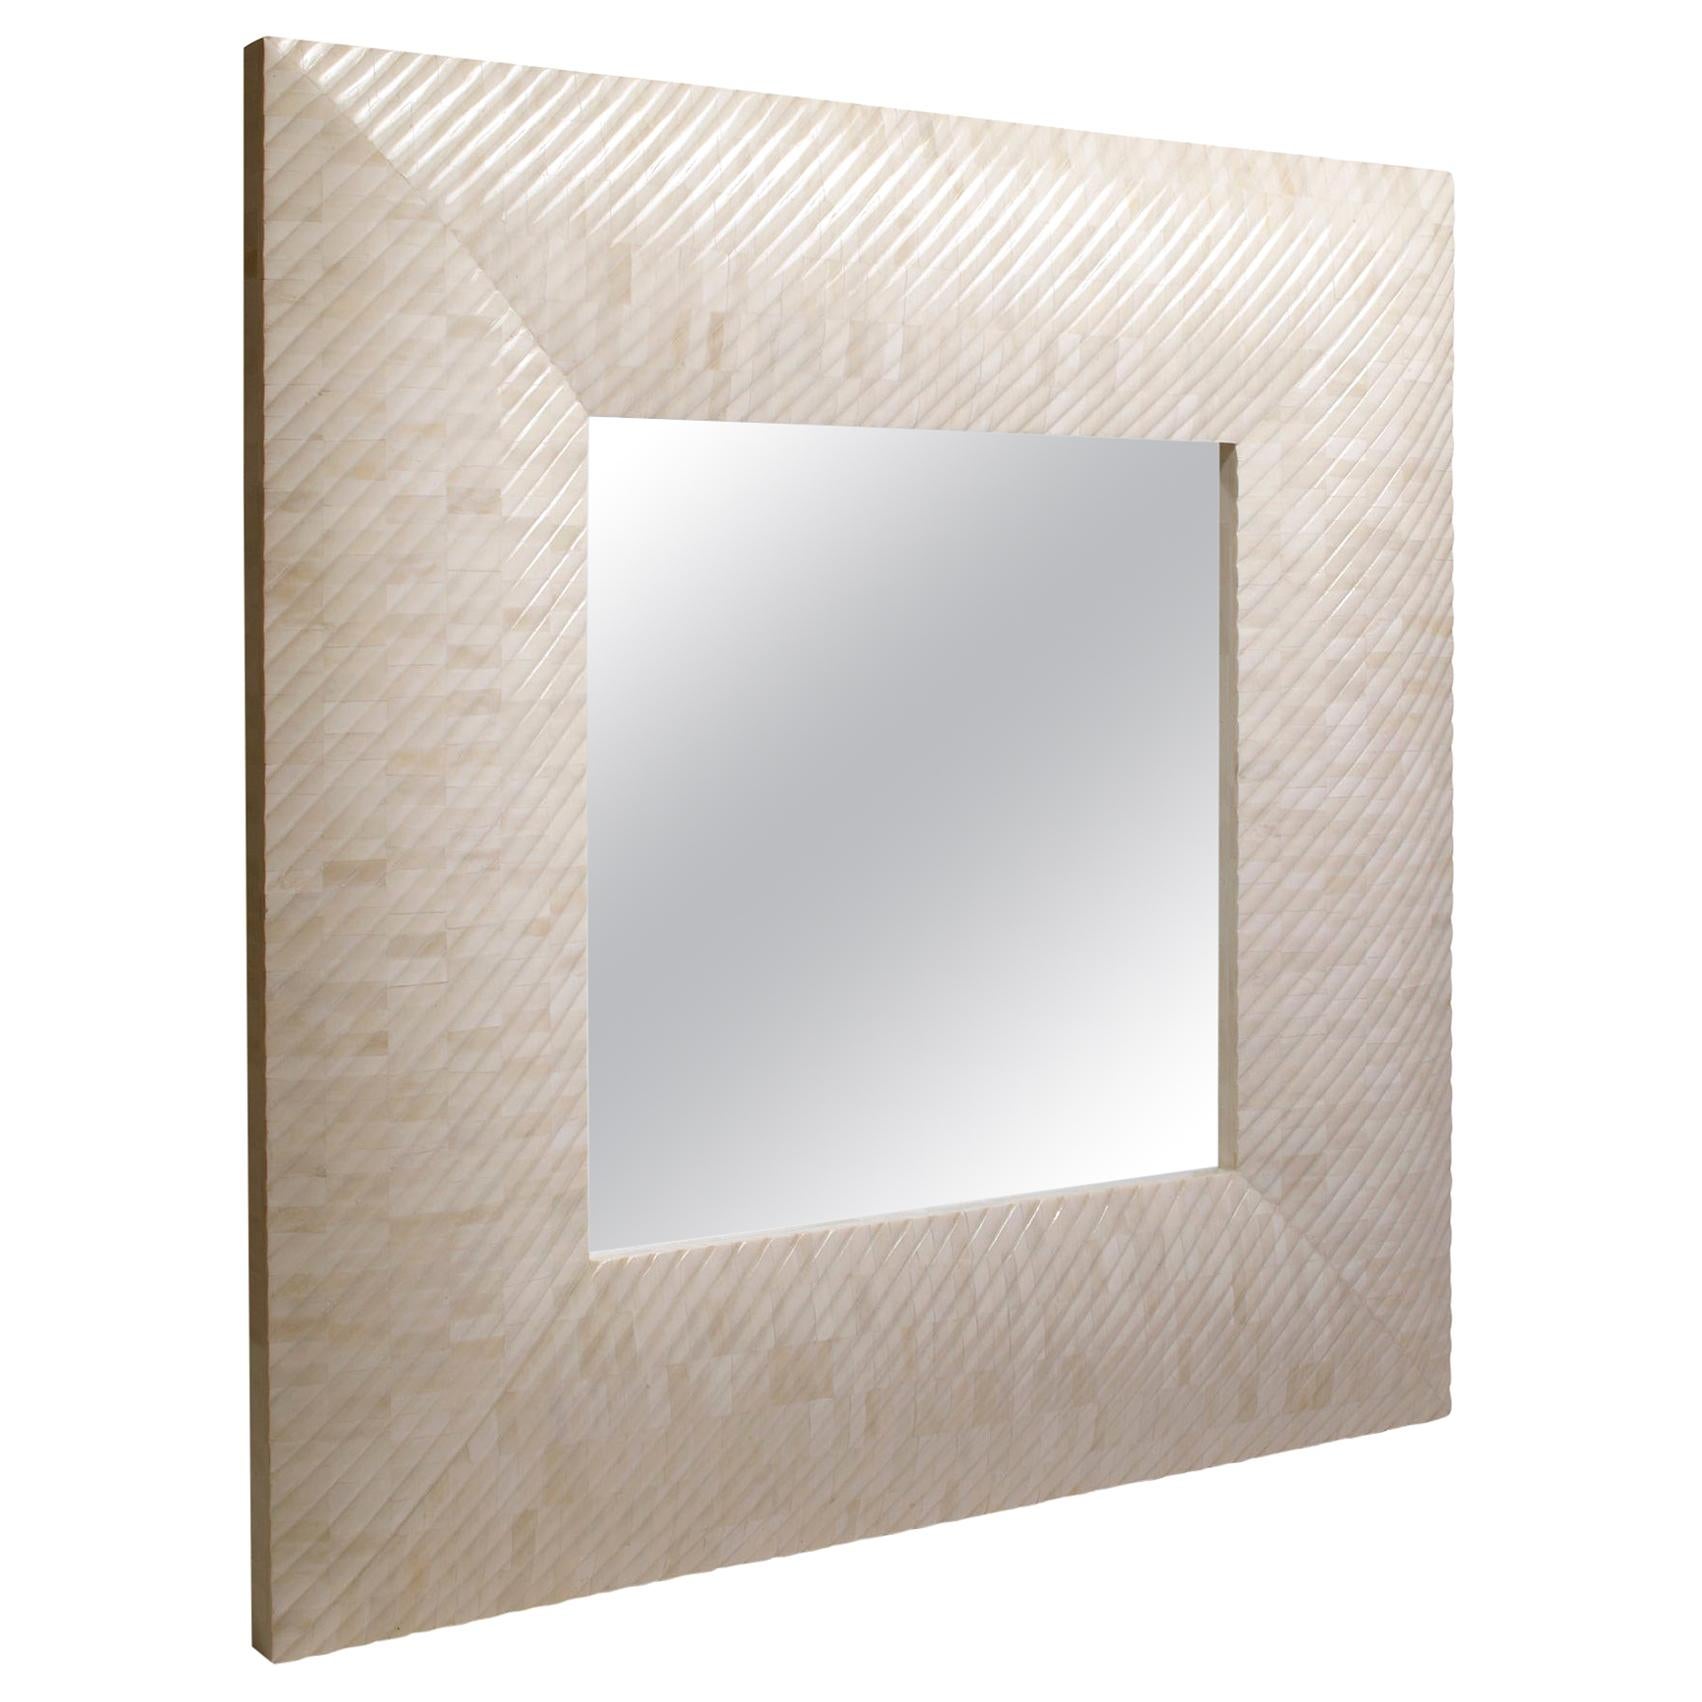 Instock Square Mirror Made with Carved Bone, Aspire Mirror